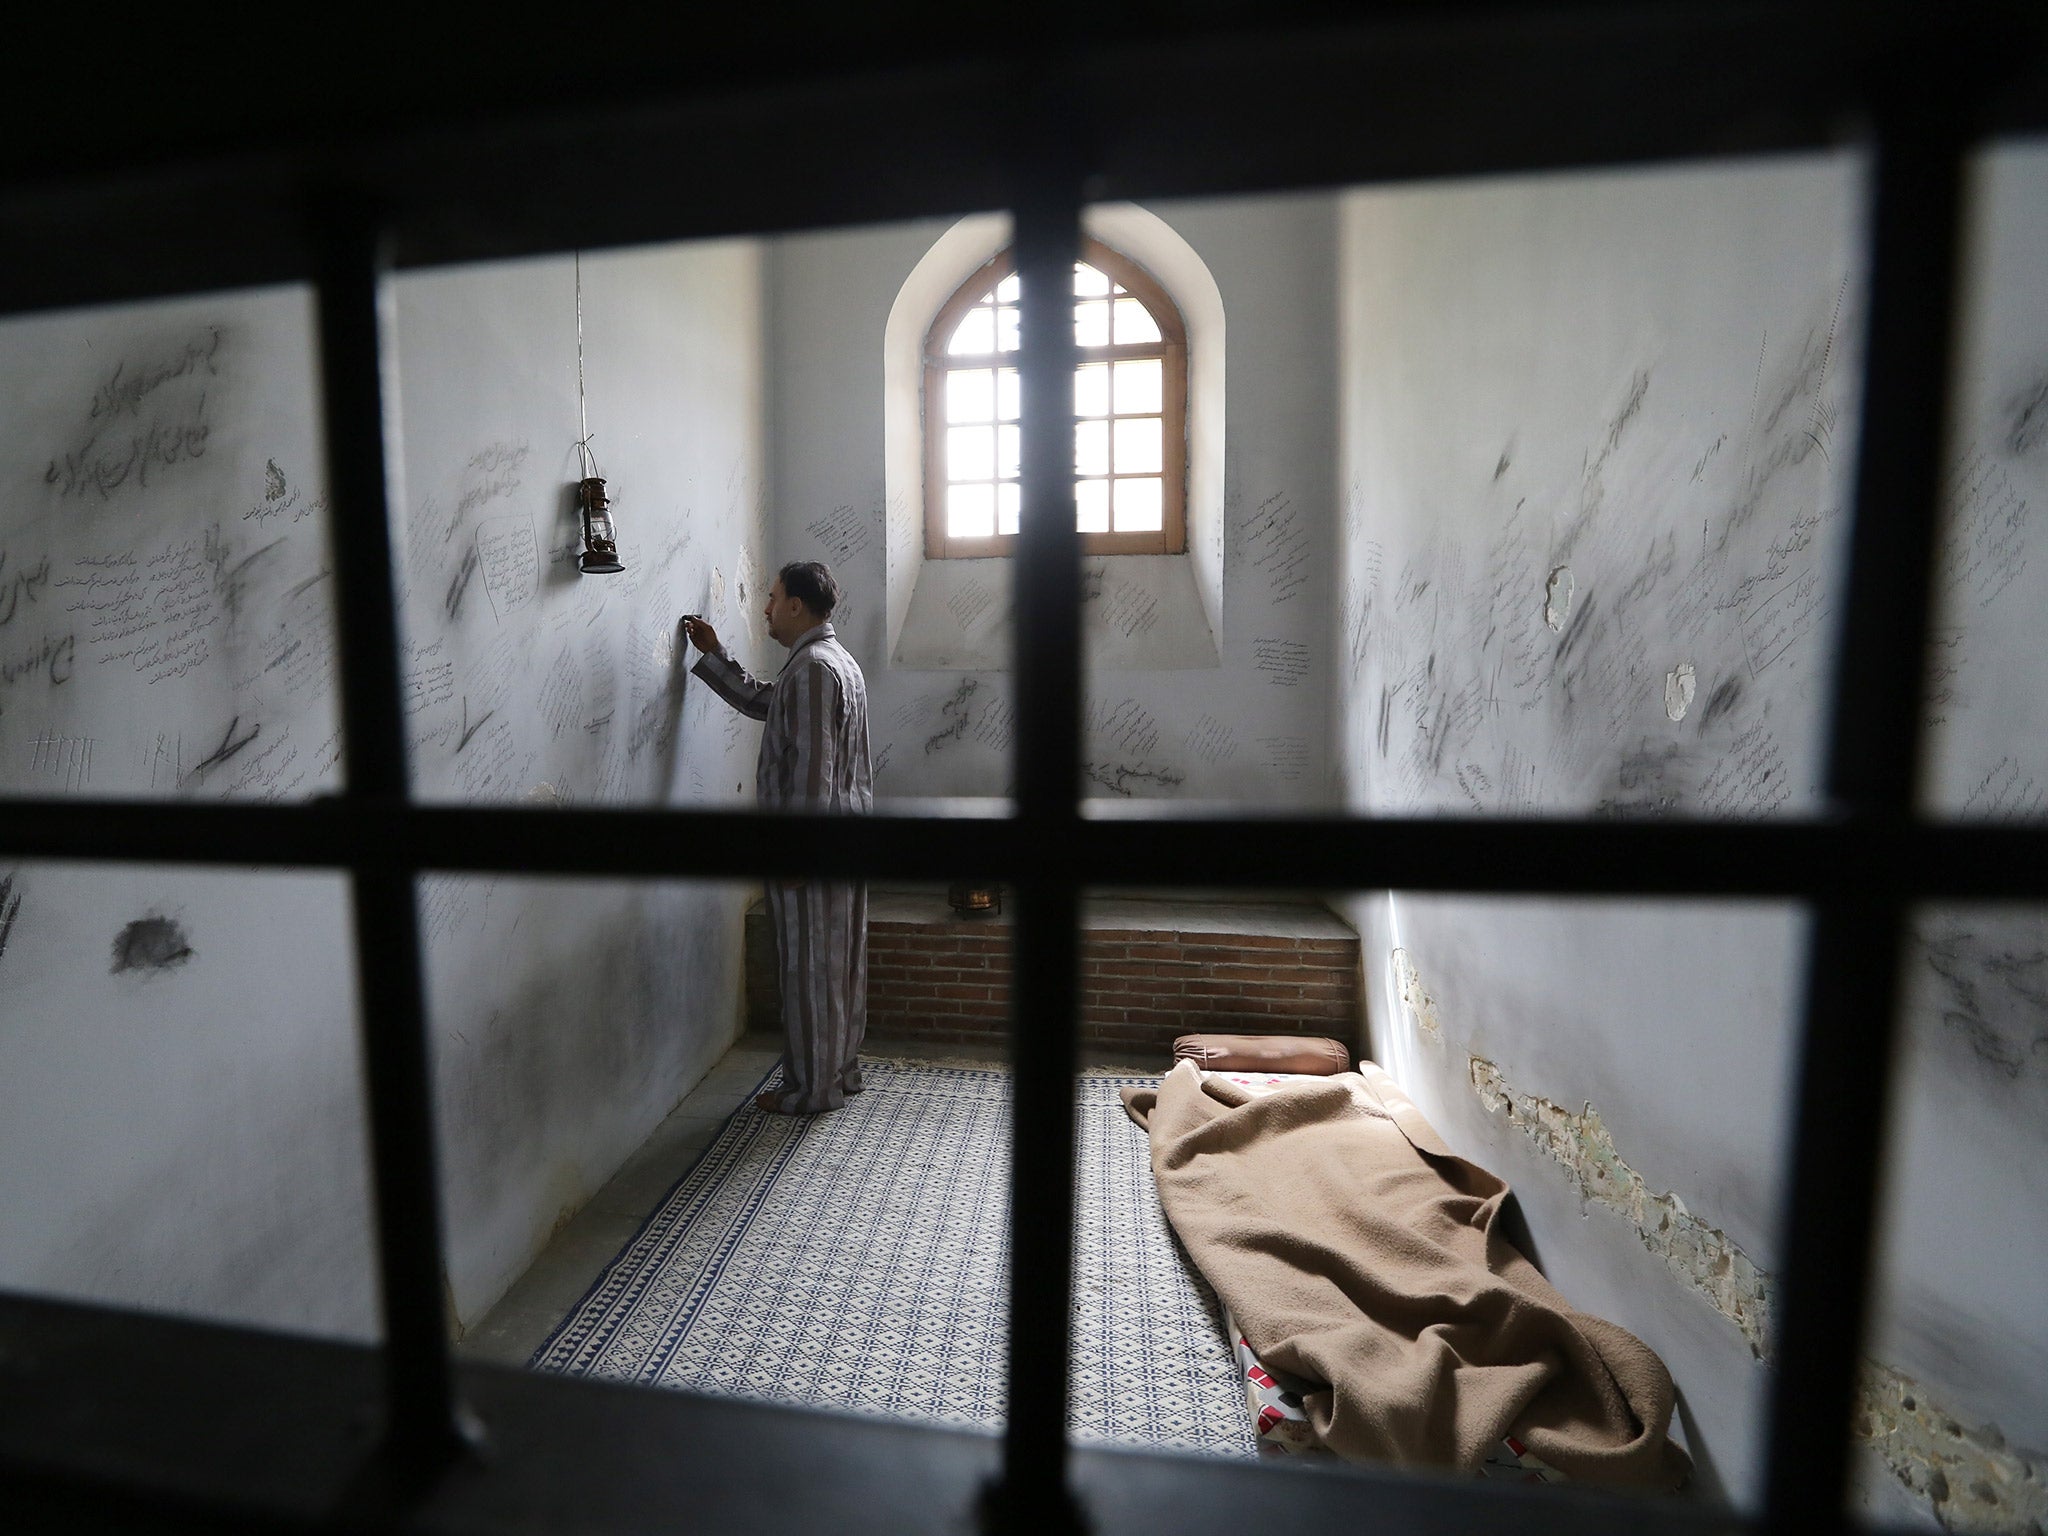 A look inside a cell at the 'Qasr prison' in Tehran. The facility, which was used to host political prisoners, was turned into a museum in 2012